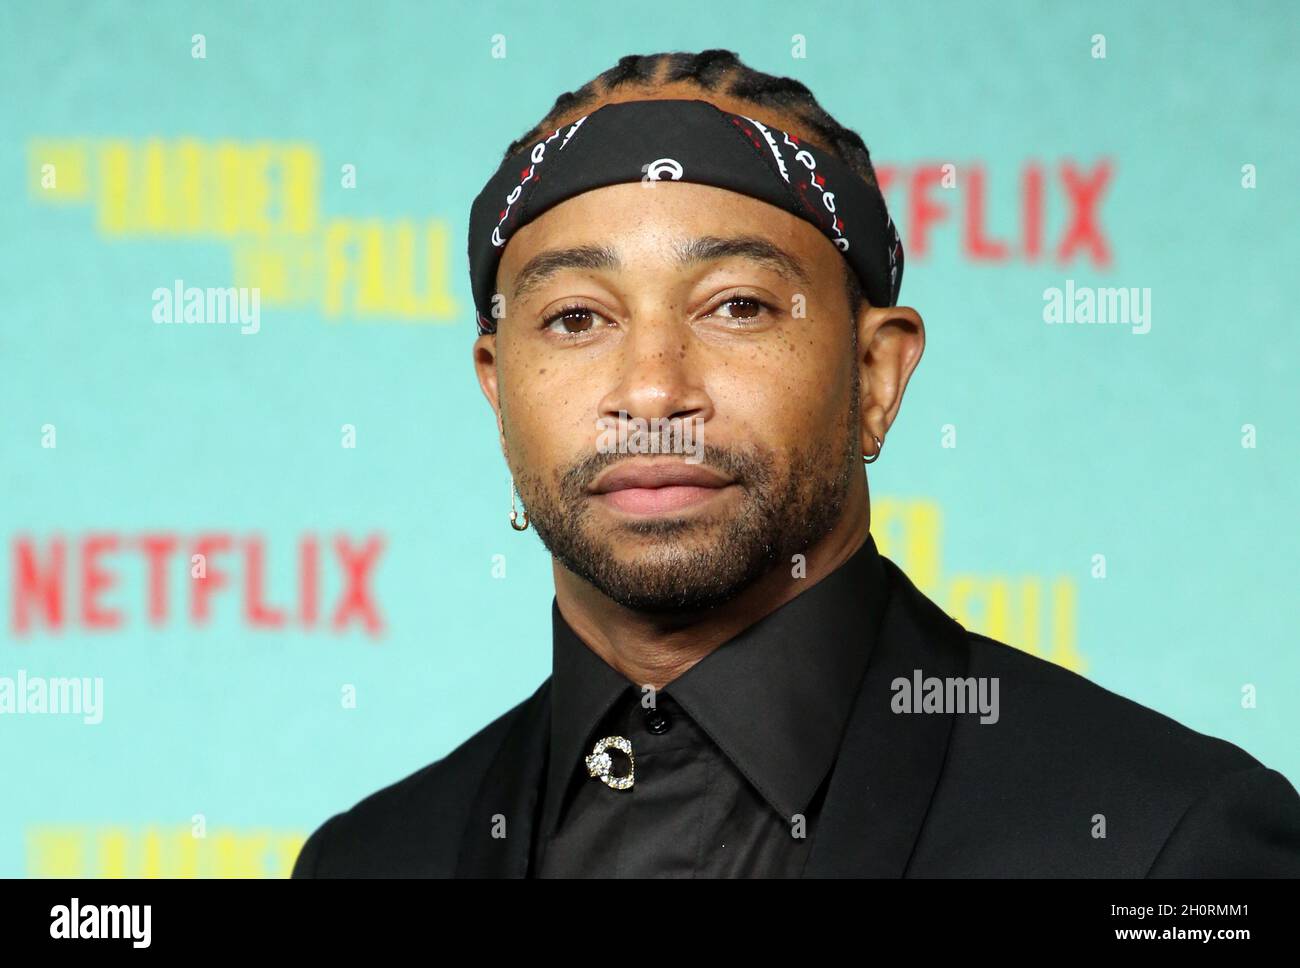 Los Angeles, Ca. Oktober 2021. Kevin Phillips, bei der Special Screening of the Harder they Fall am 13. Oktober 2021 im Shrine in Los Angeles, Kalifornien. Quelle: Saye Sadou/Media Punch/Alamy Live News Stockfoto